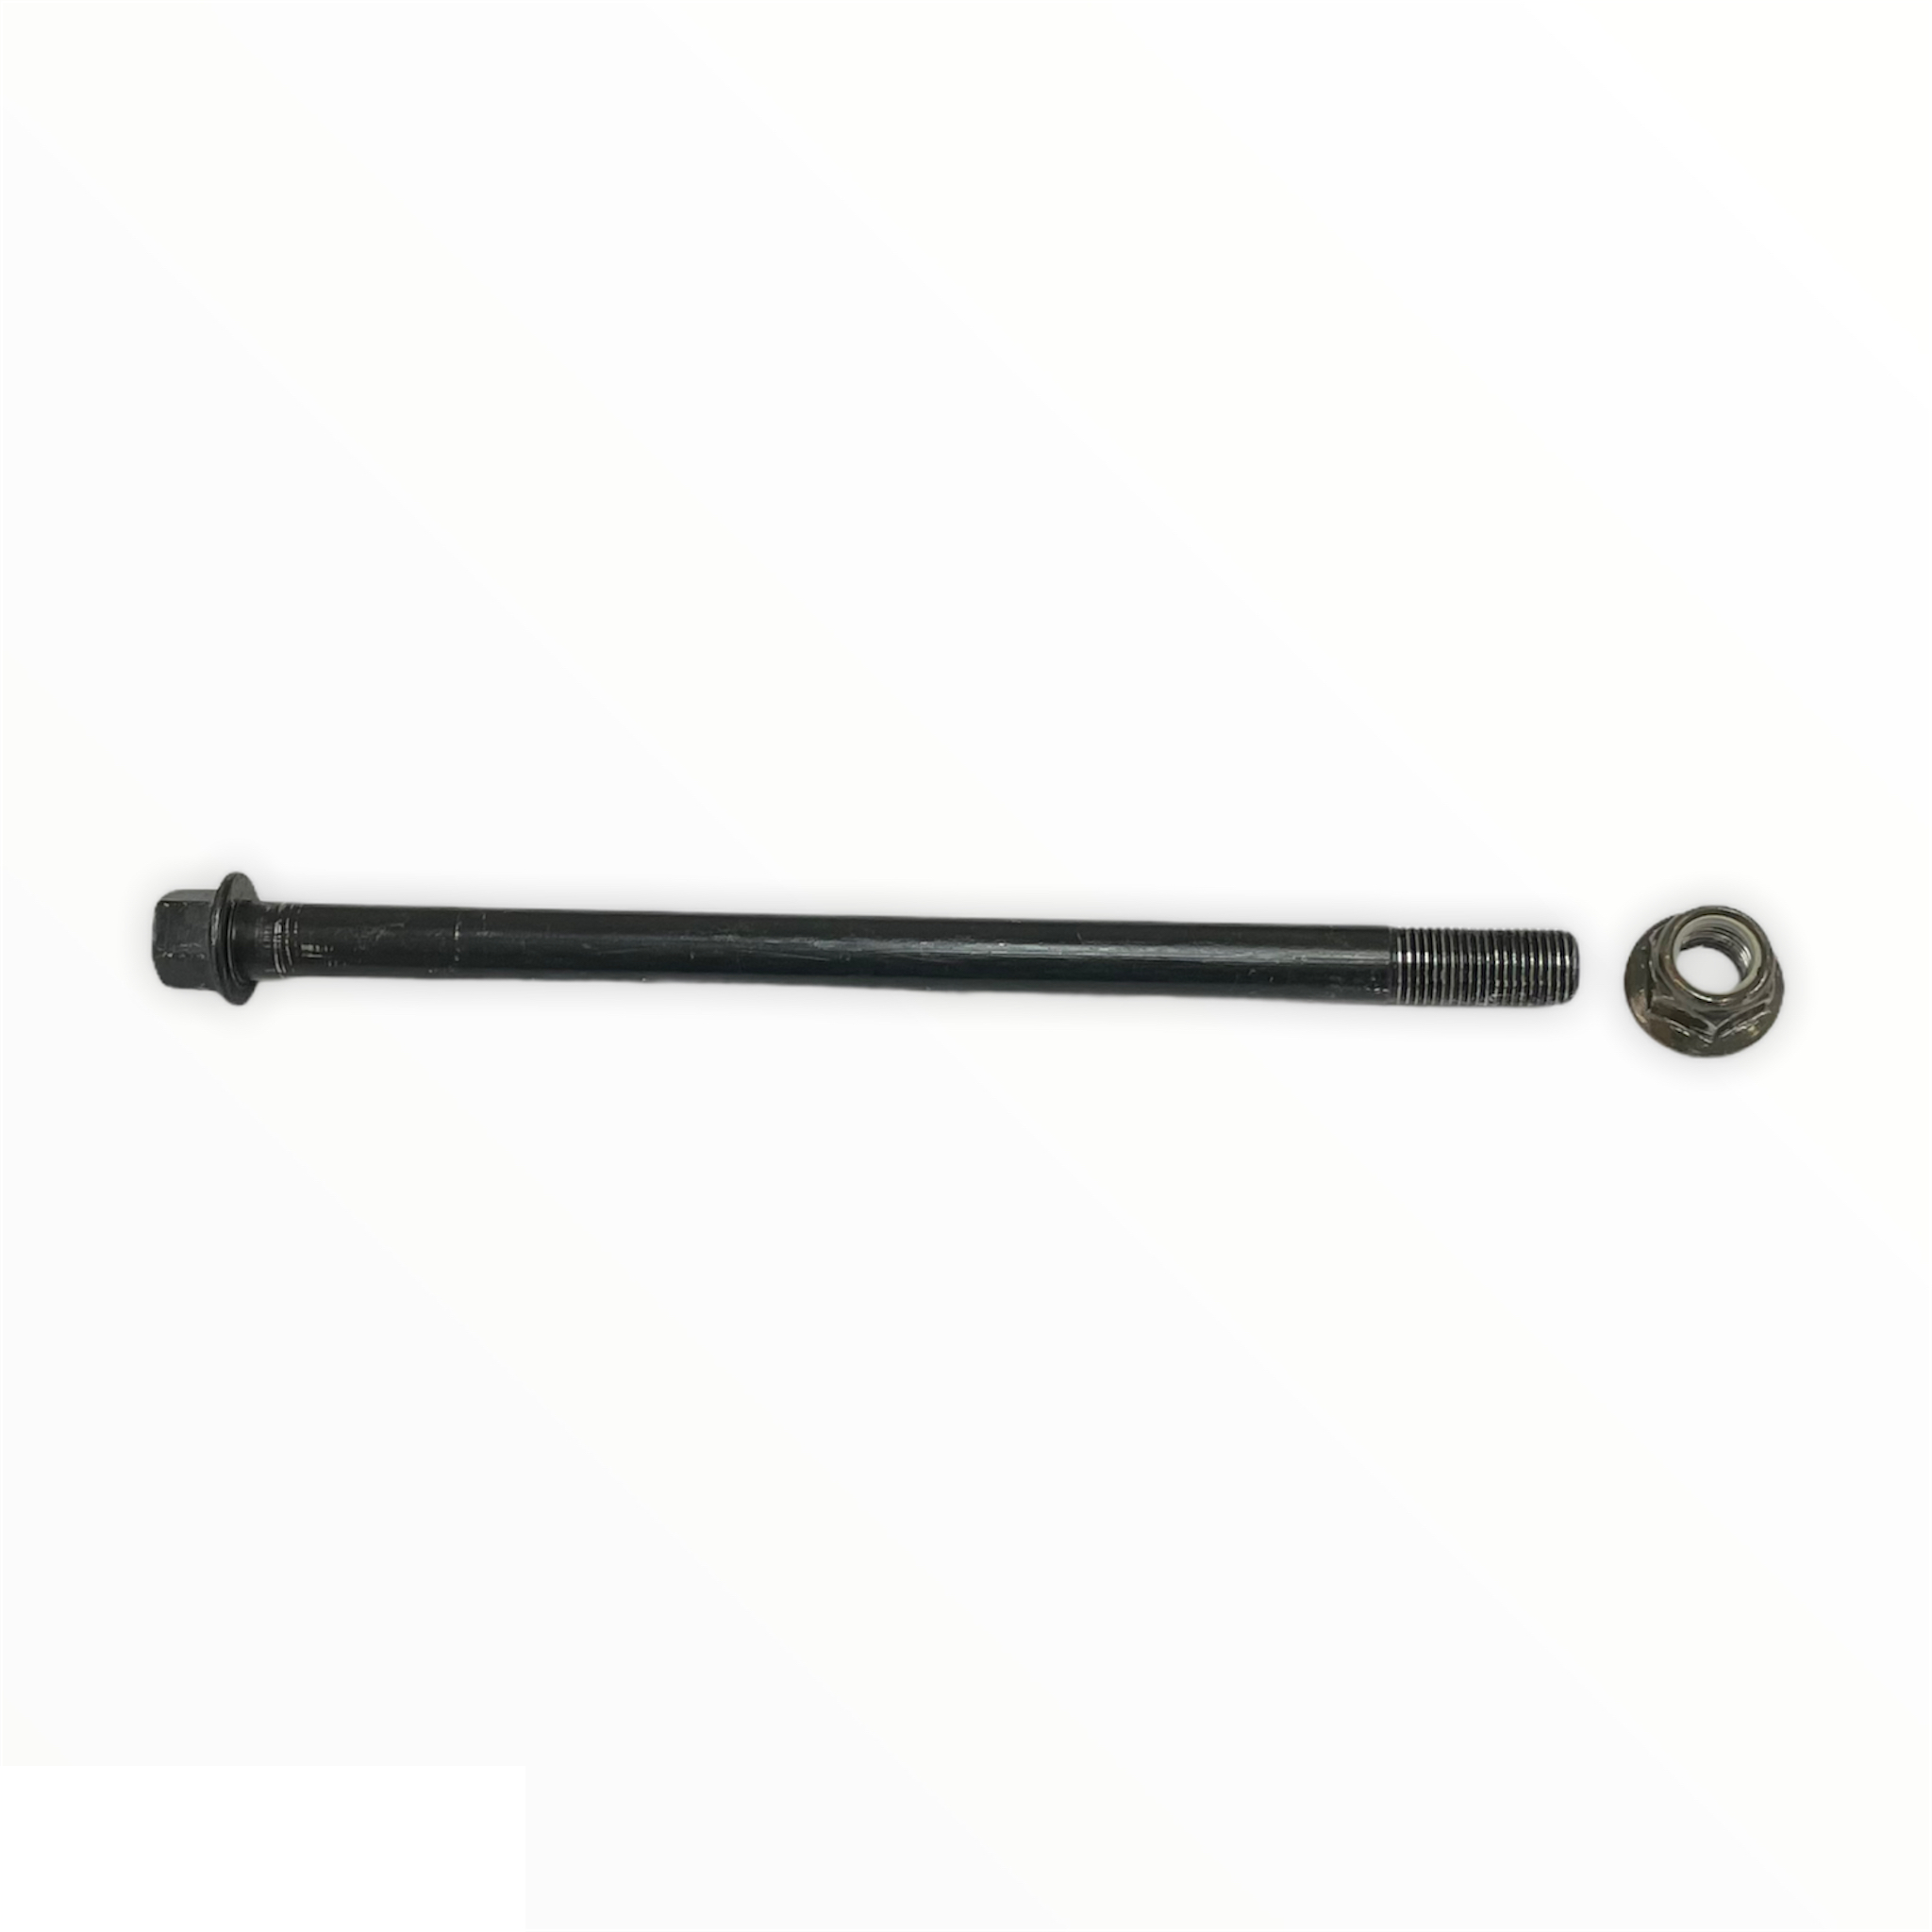 MIDDLE AXEL M14(263X12MM)